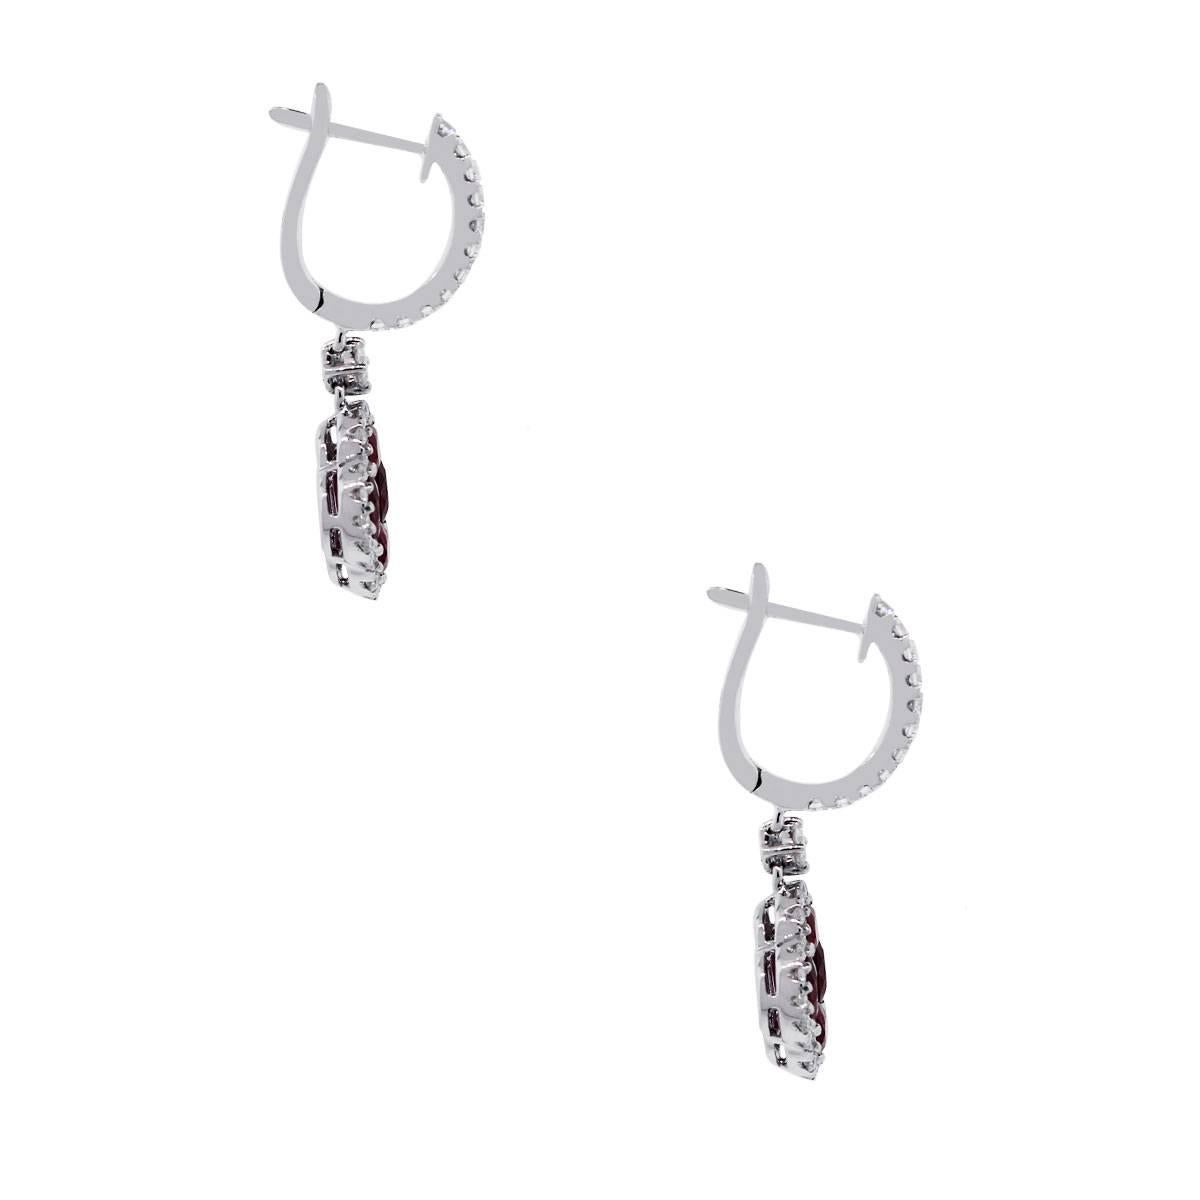 Material: 18k white gold
Diamond Details: Approximately 0.54ctw round brilliant cut diamonds. Diamonds are G/H in color and VS in clarity.
Gemstone Details: Approximately 2.05ctw ruby gemstones.
Earring Measurements: 0.45″ x 0.20″ x 1″
Earring